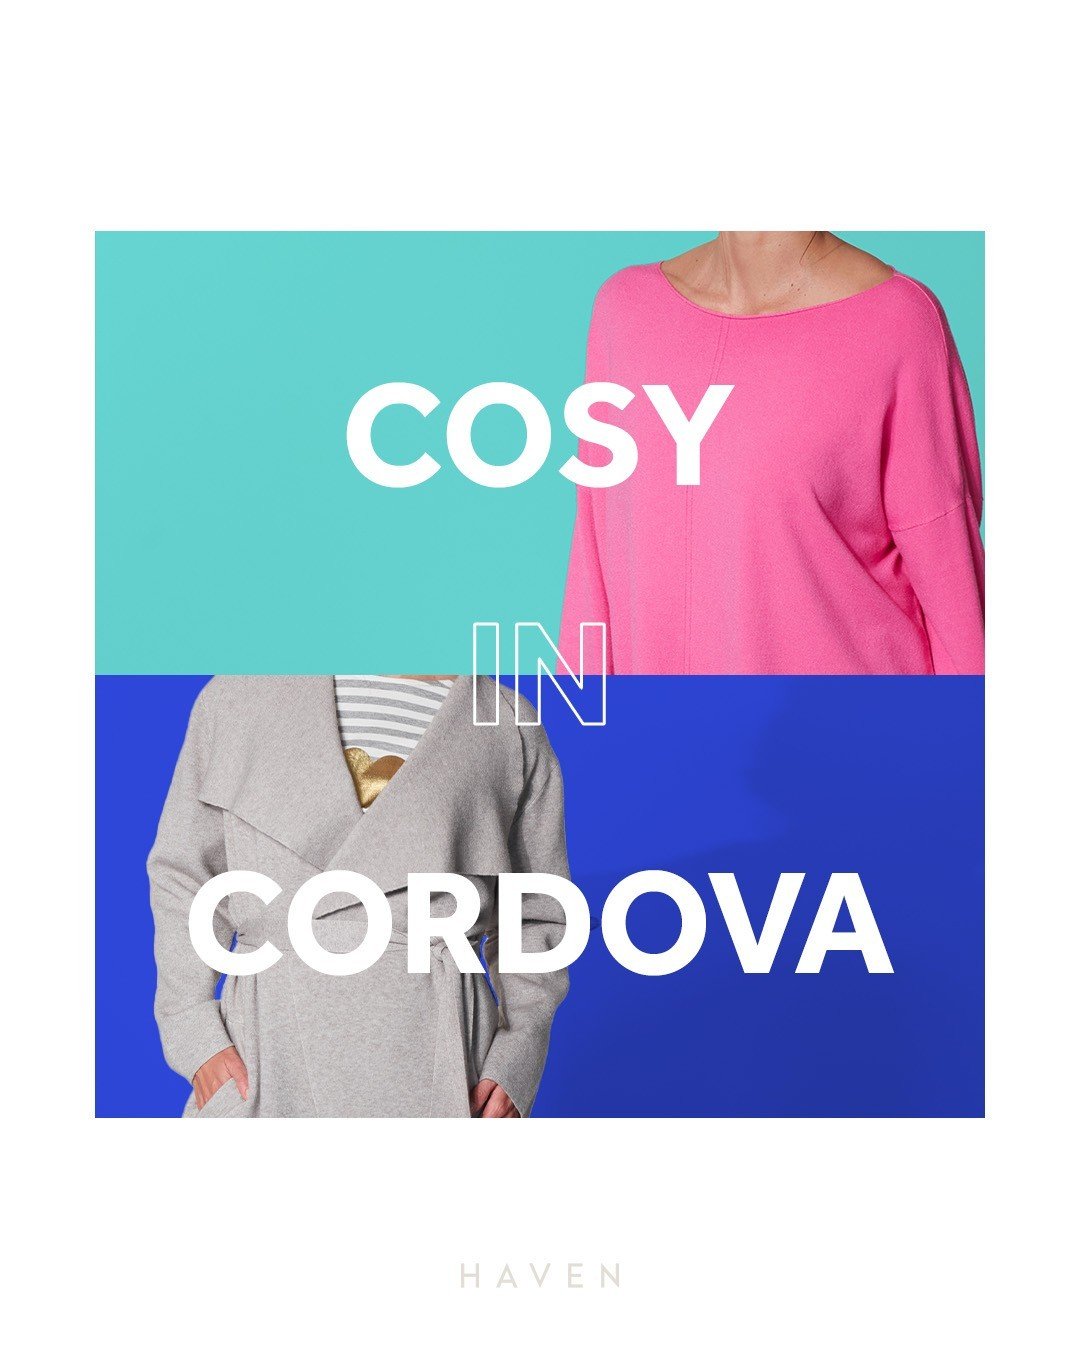 🌀FOCUS ON | The Cordova Collection⁠
Your weekend wardrobe just found its match!😍 From dressing up to chilling out, the timeless designs and adaptable shapes of the Cordova Collection from @thehavenco have you covered with silhouettes that can handl